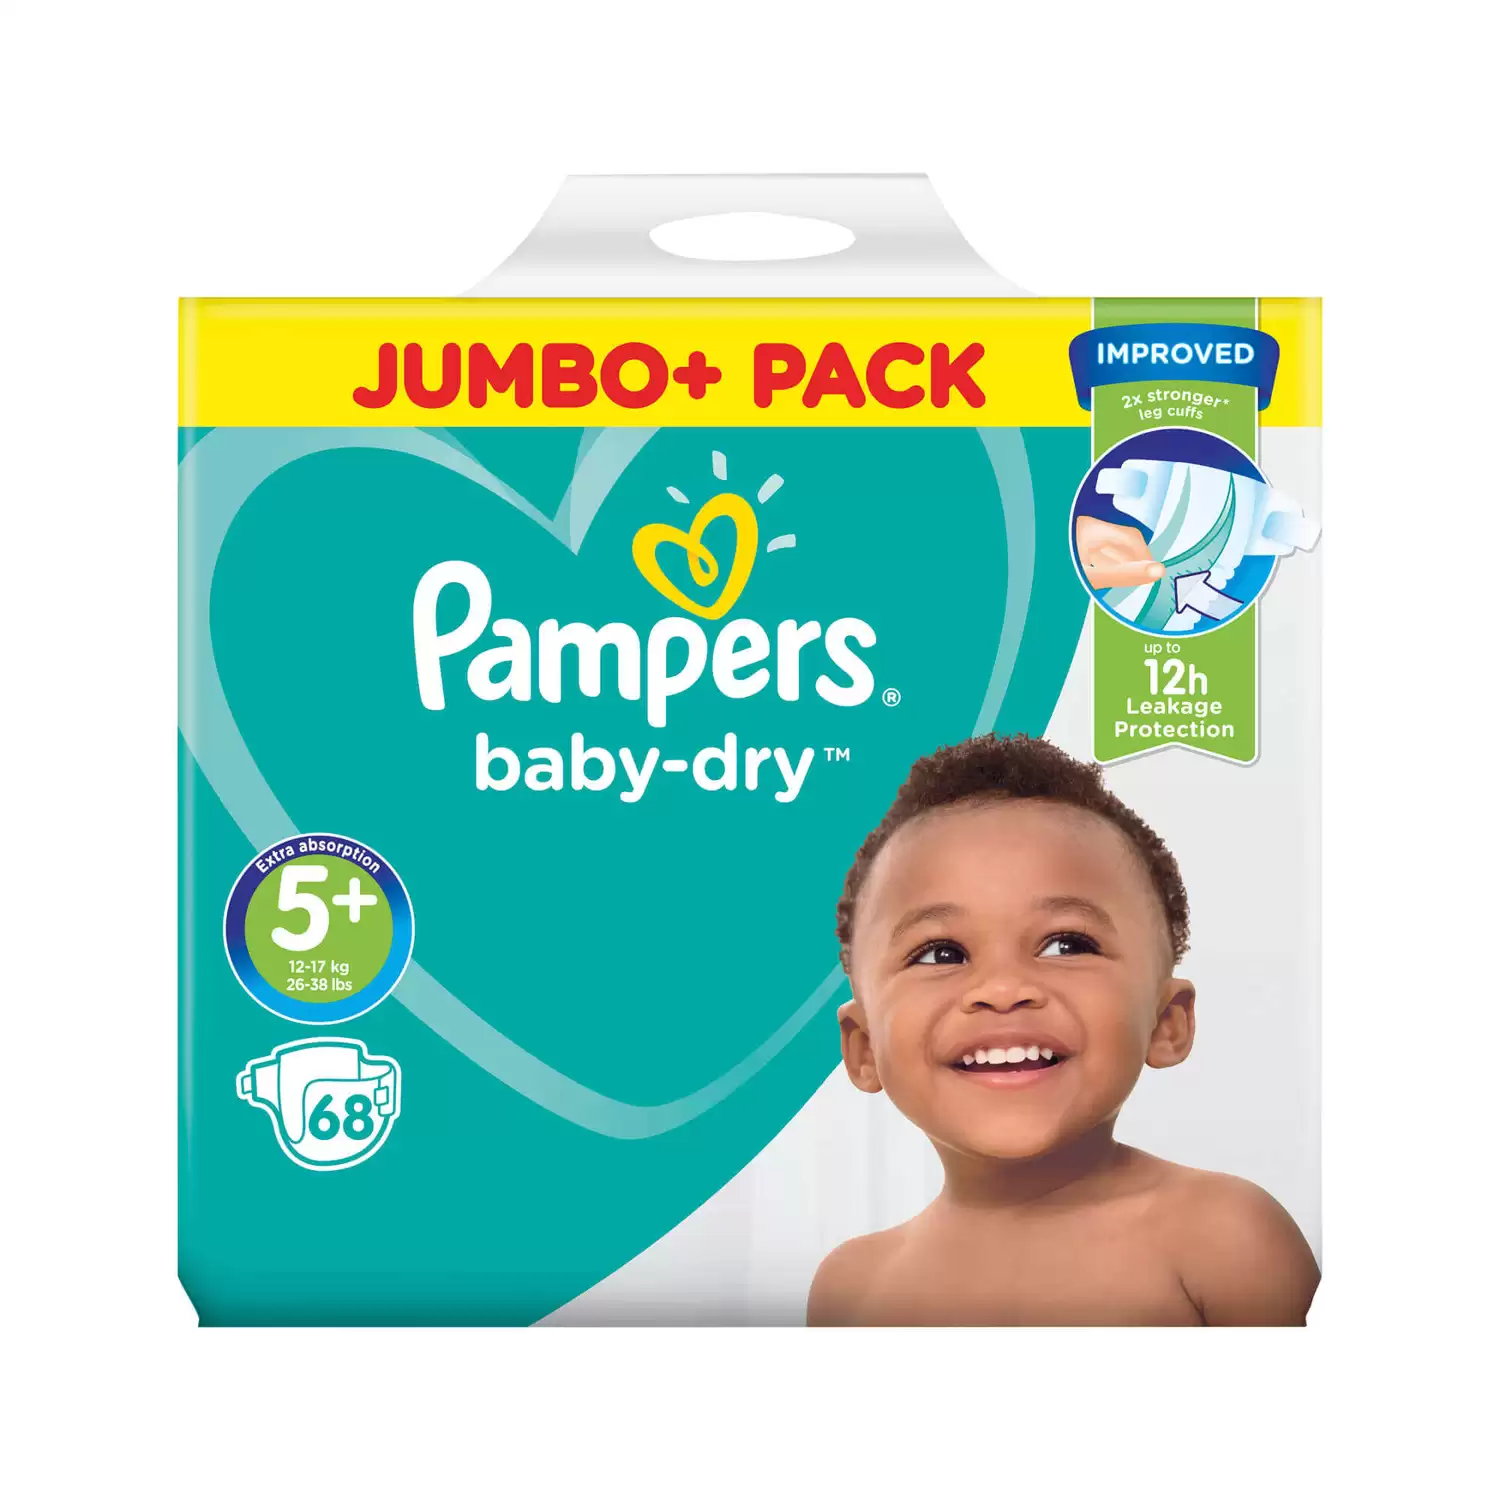 pampers 5 nappies